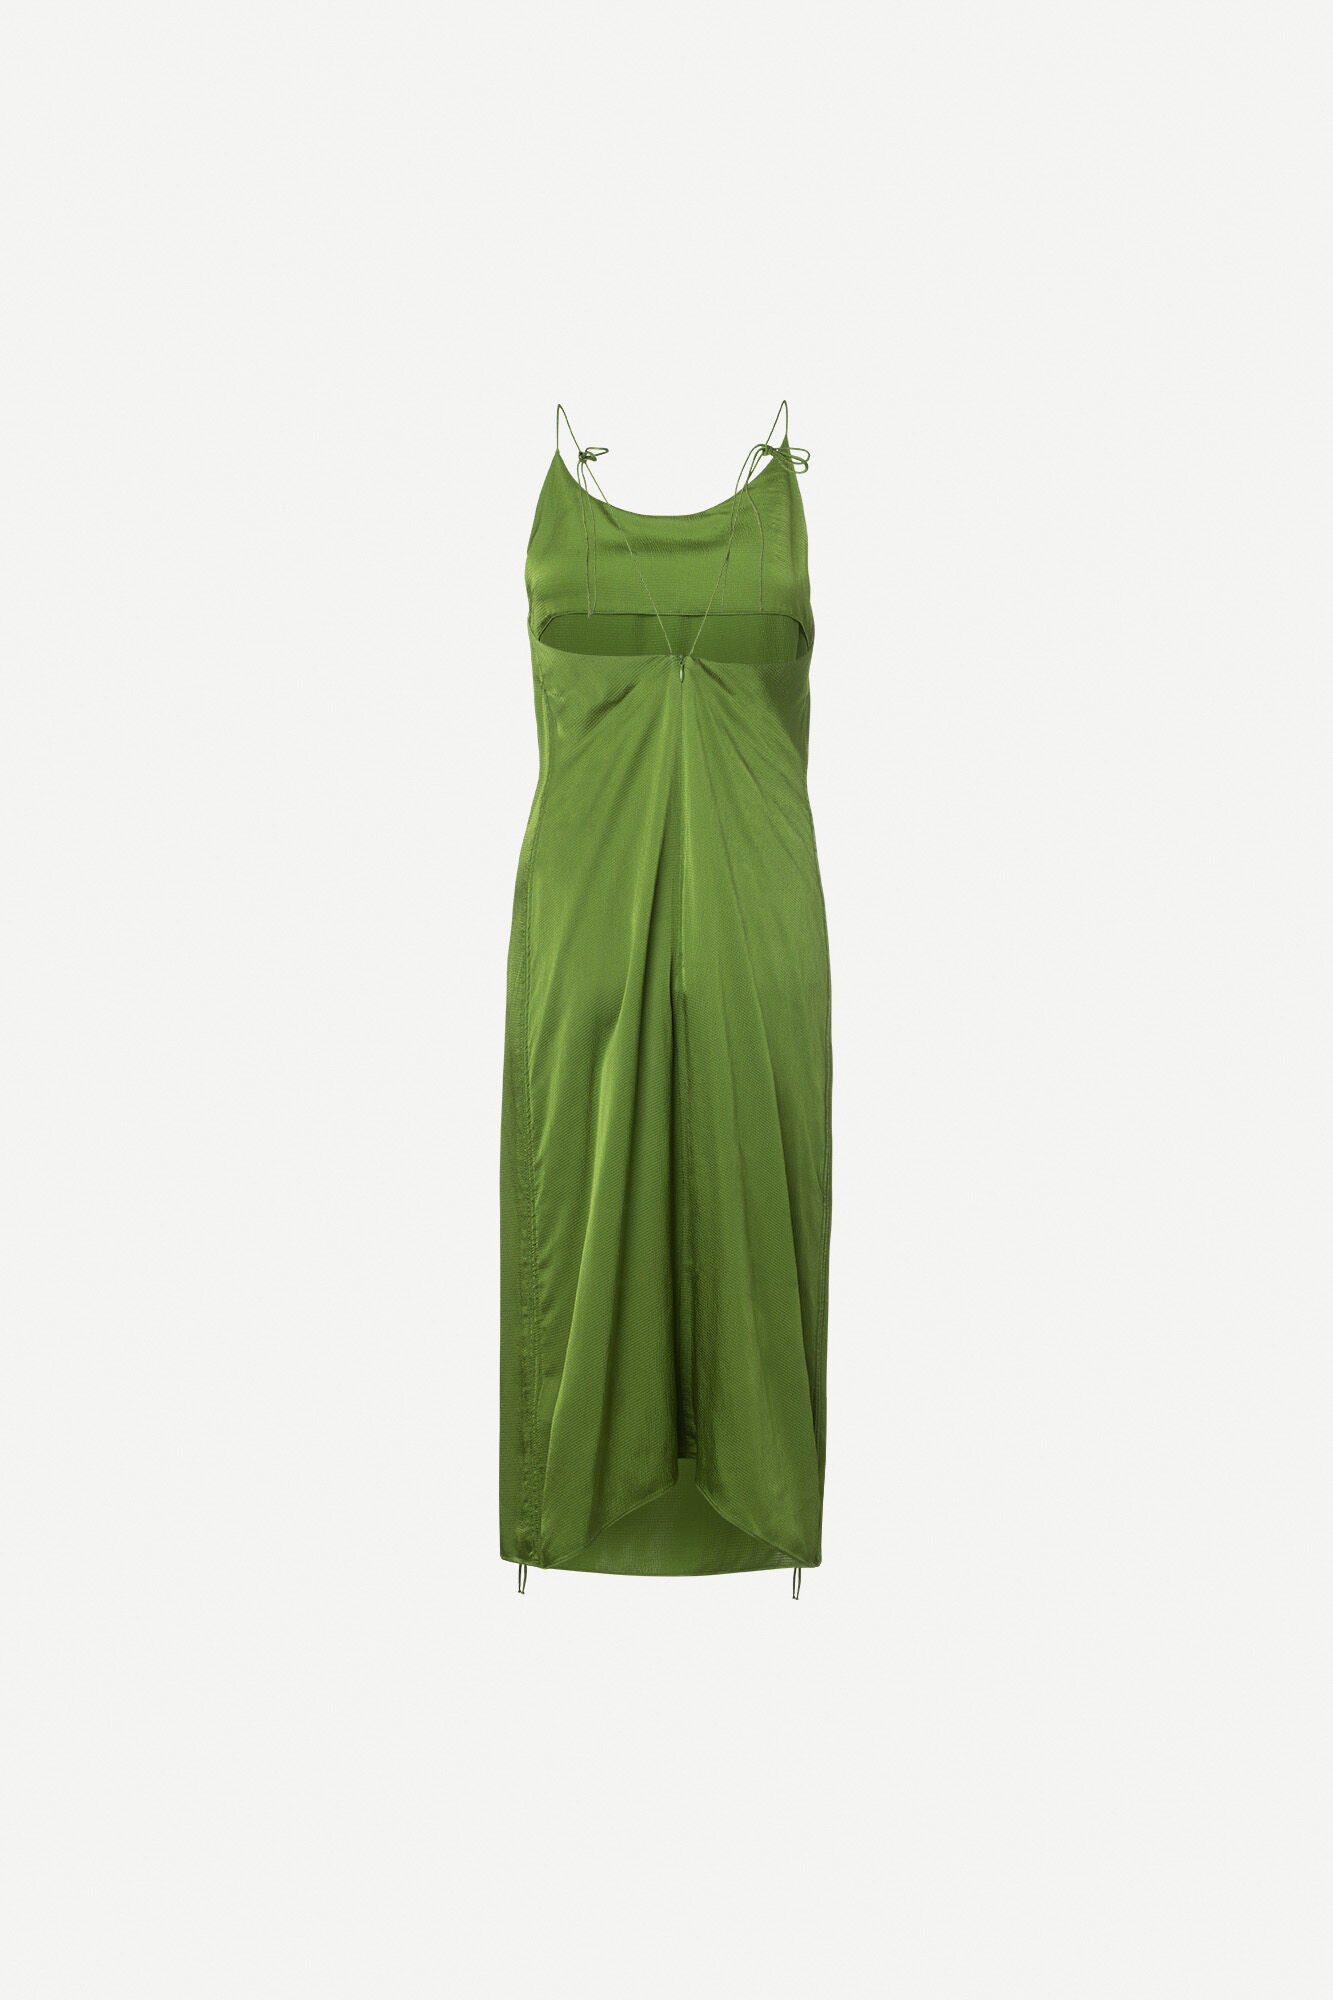 TANIA DRESS IN TWIST OF LIME